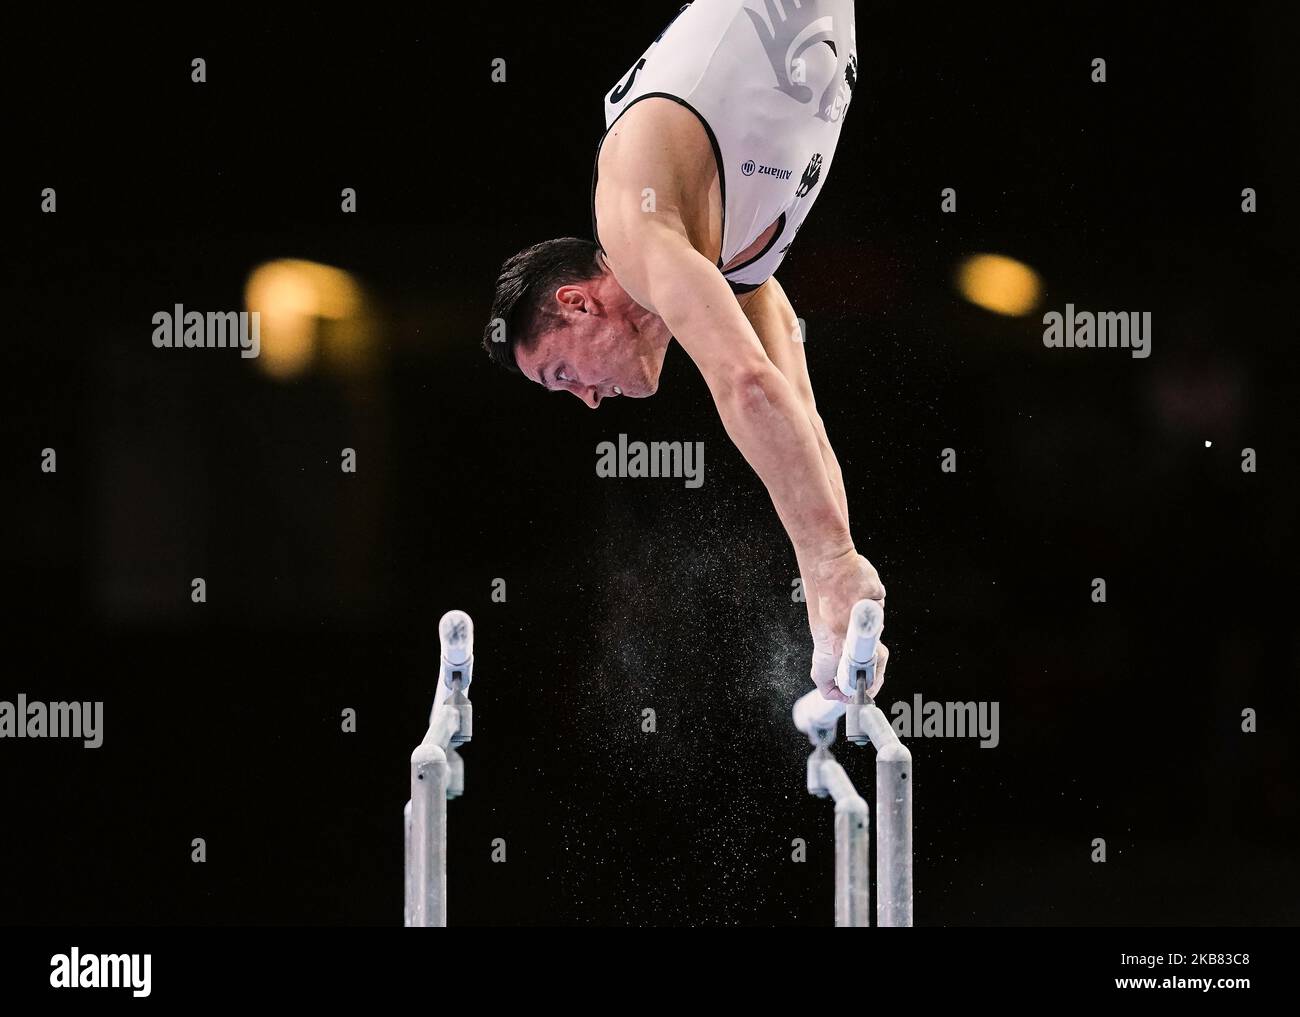 Andreas Toba of Germany during parallel bars for men at the 49th FIG Artistic Gymnastics World Championships in Hanns Martin Schleyer Halle in Stuttgart, Germany on October 11, 2019. (Photo by Ulrik Pedersen/NurPhoto) Stock Photo